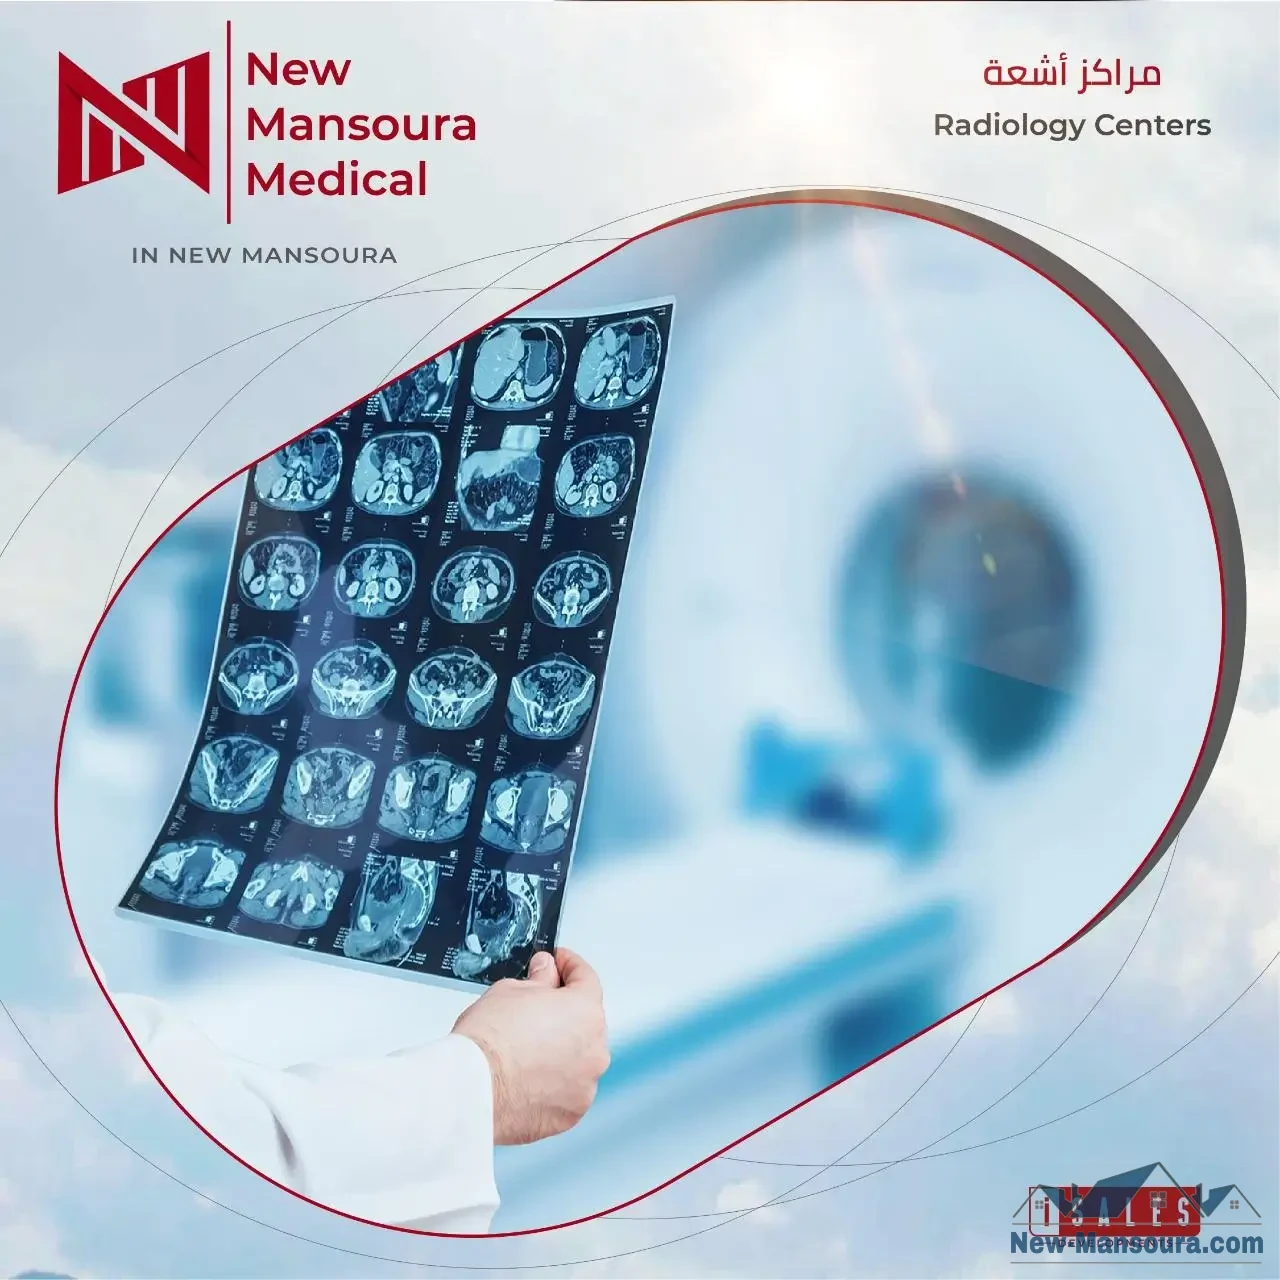 New Mansoura Medical isales company - own your clinic now